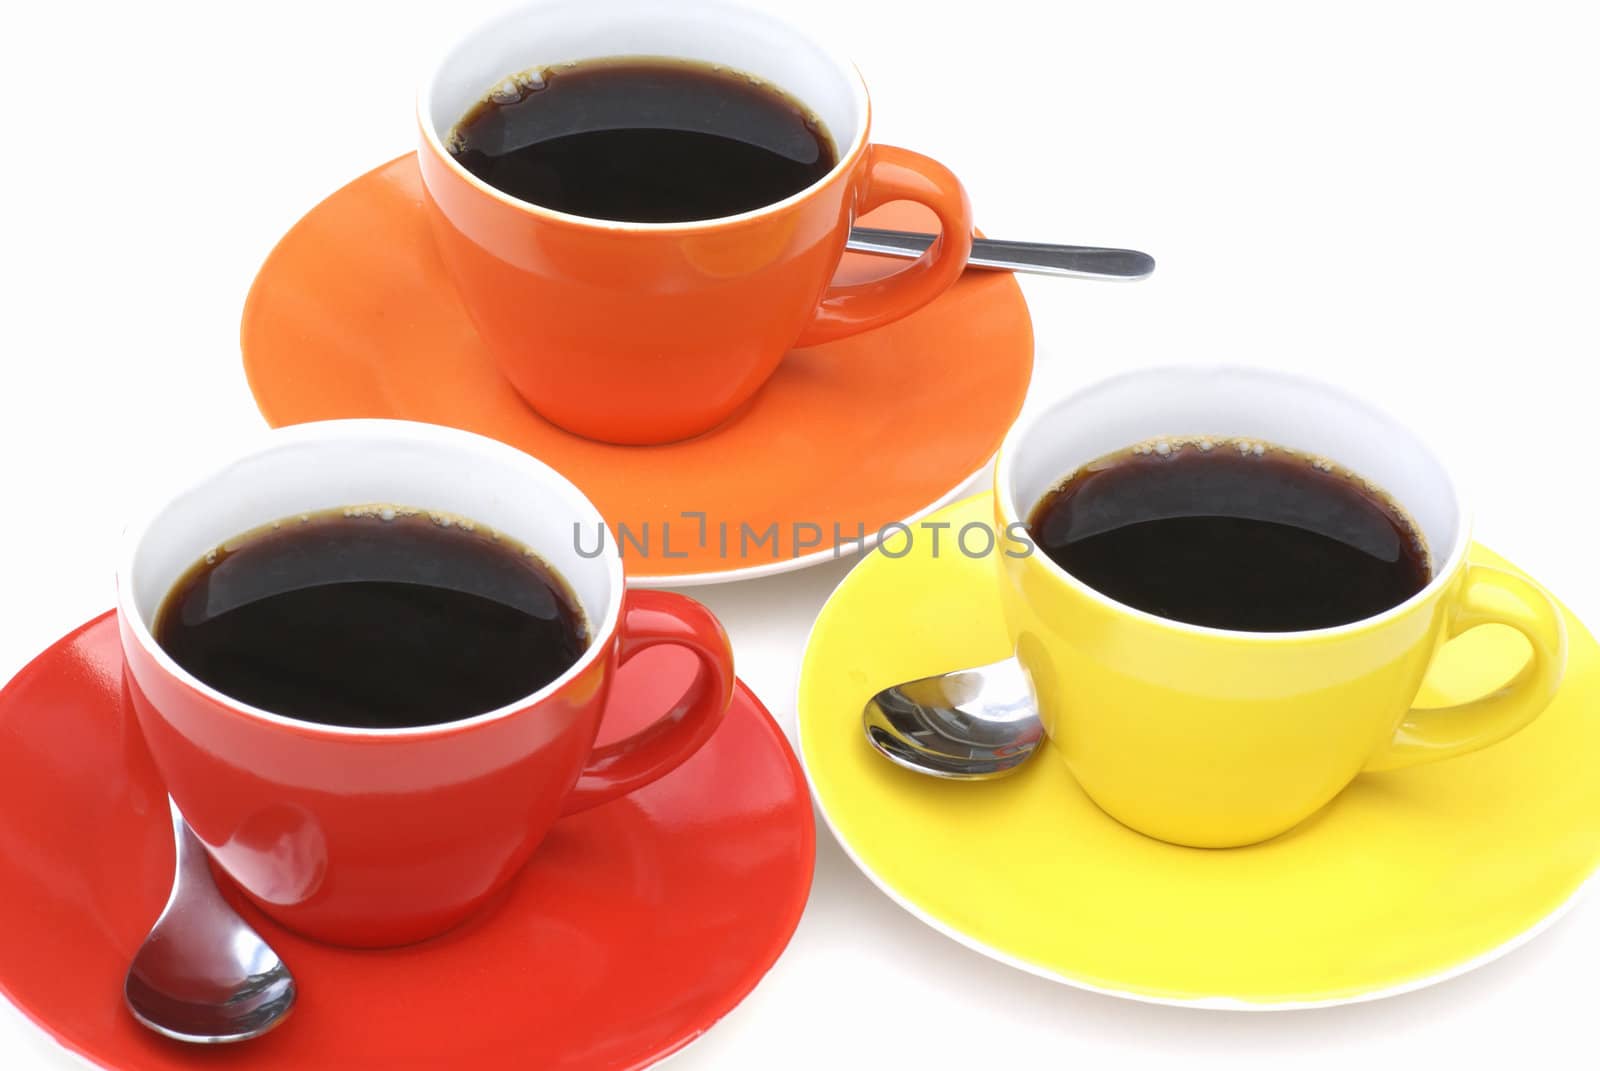 Cups of coffee in spring colors.